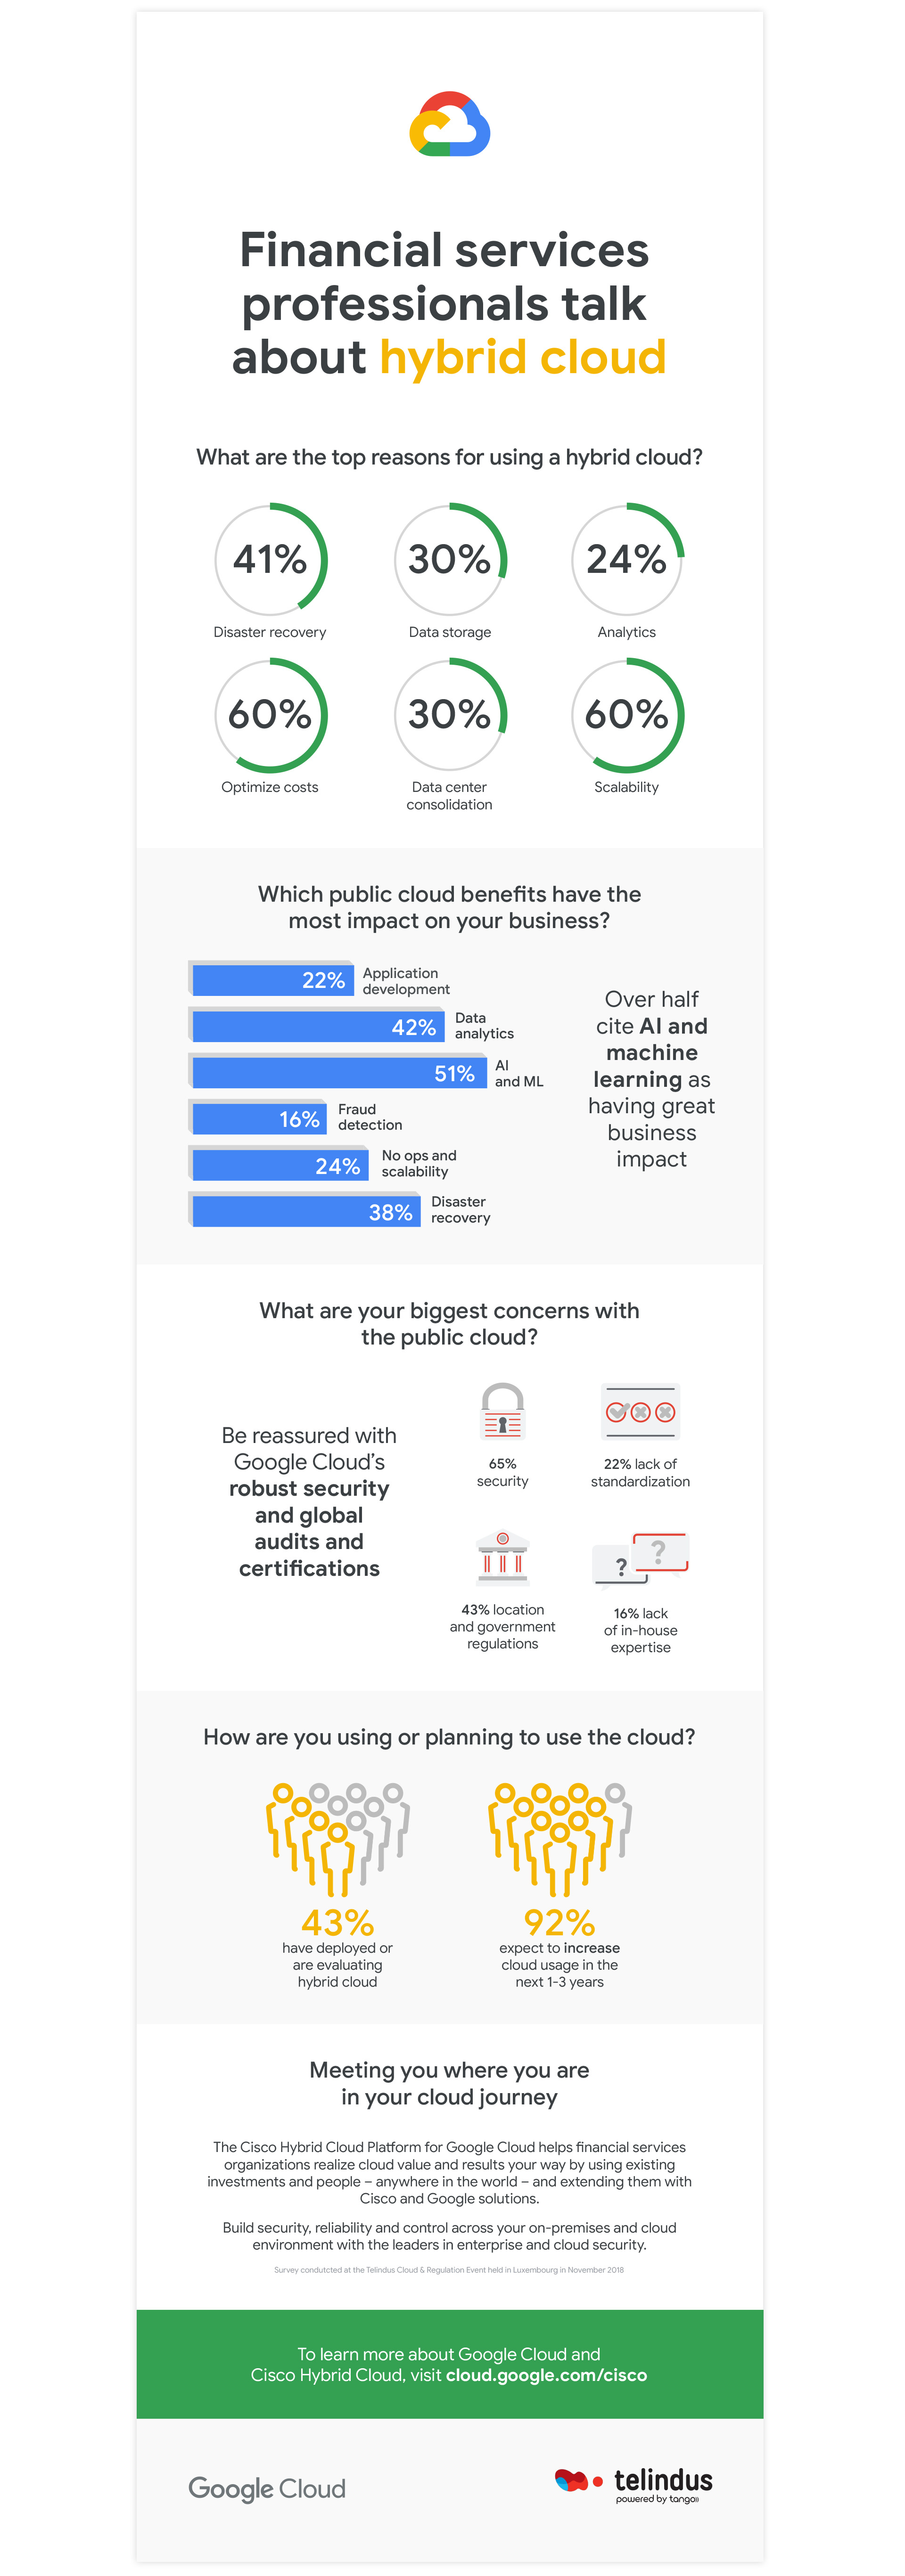 Google Cloud and the hybrid cloud